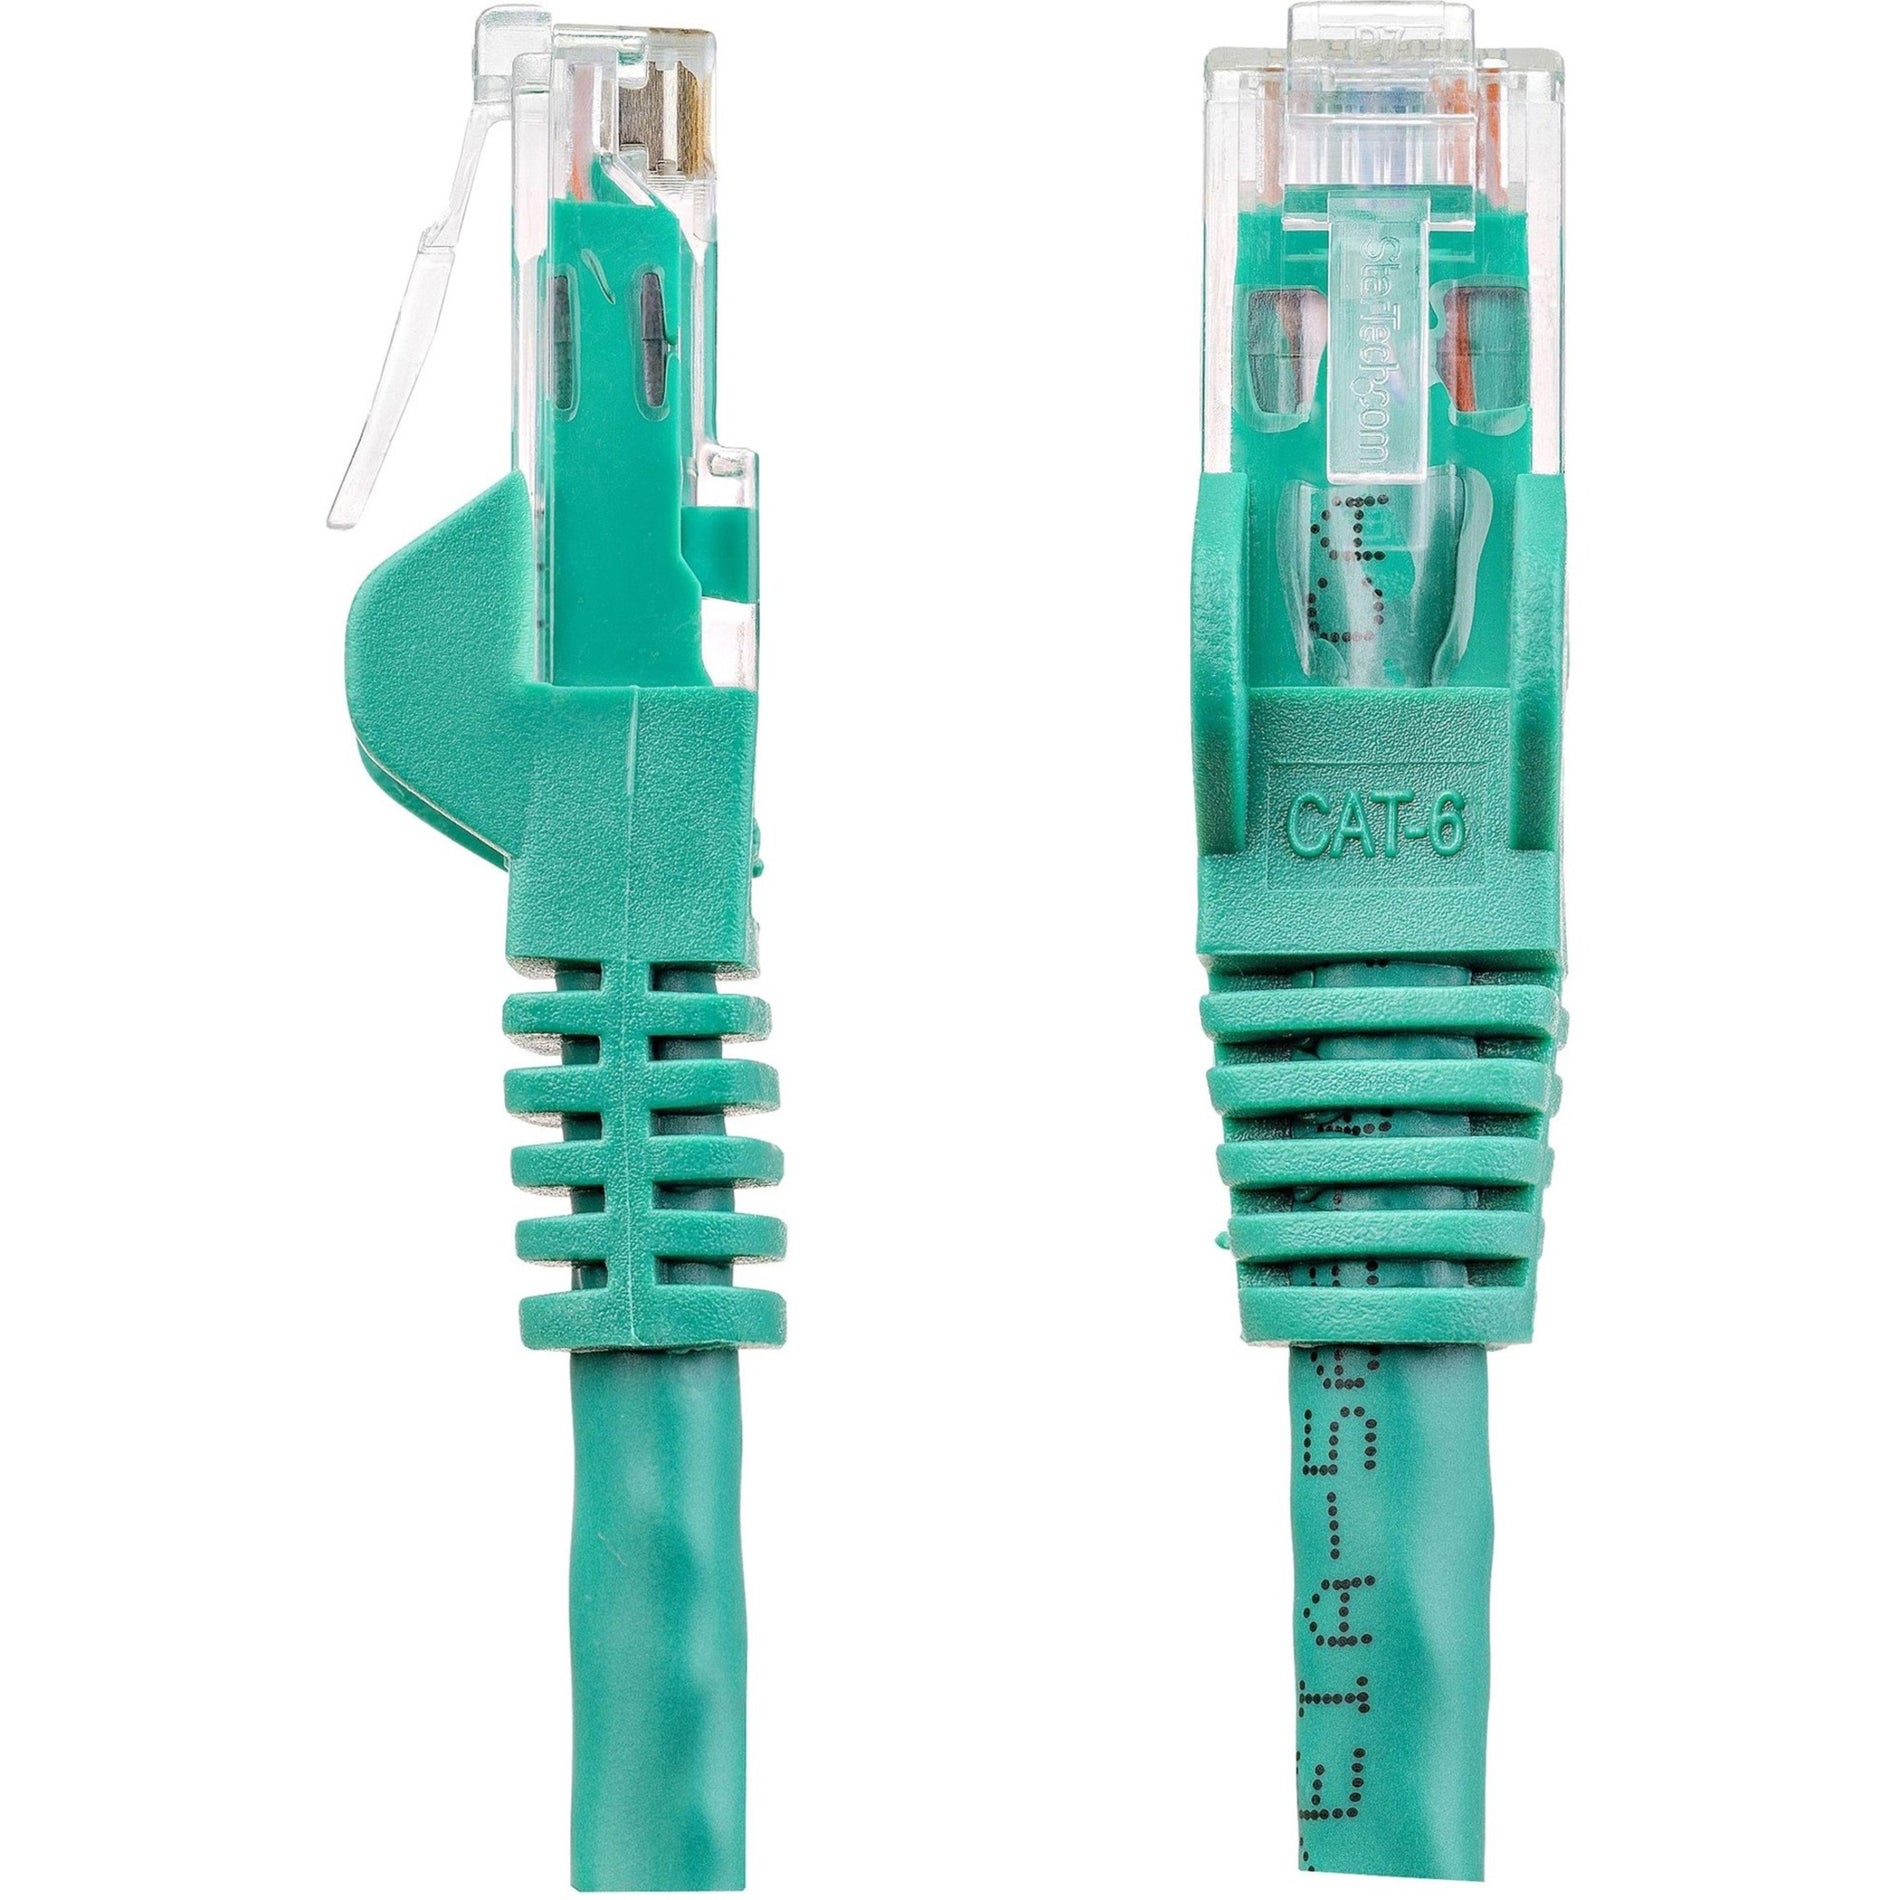 StarTech.com N6PATCH5GN 5 ft Green Snagless Cat6 UTP Patch Cable, 10 Gbit/s Data Transfer Rate, Lifetime Warranty